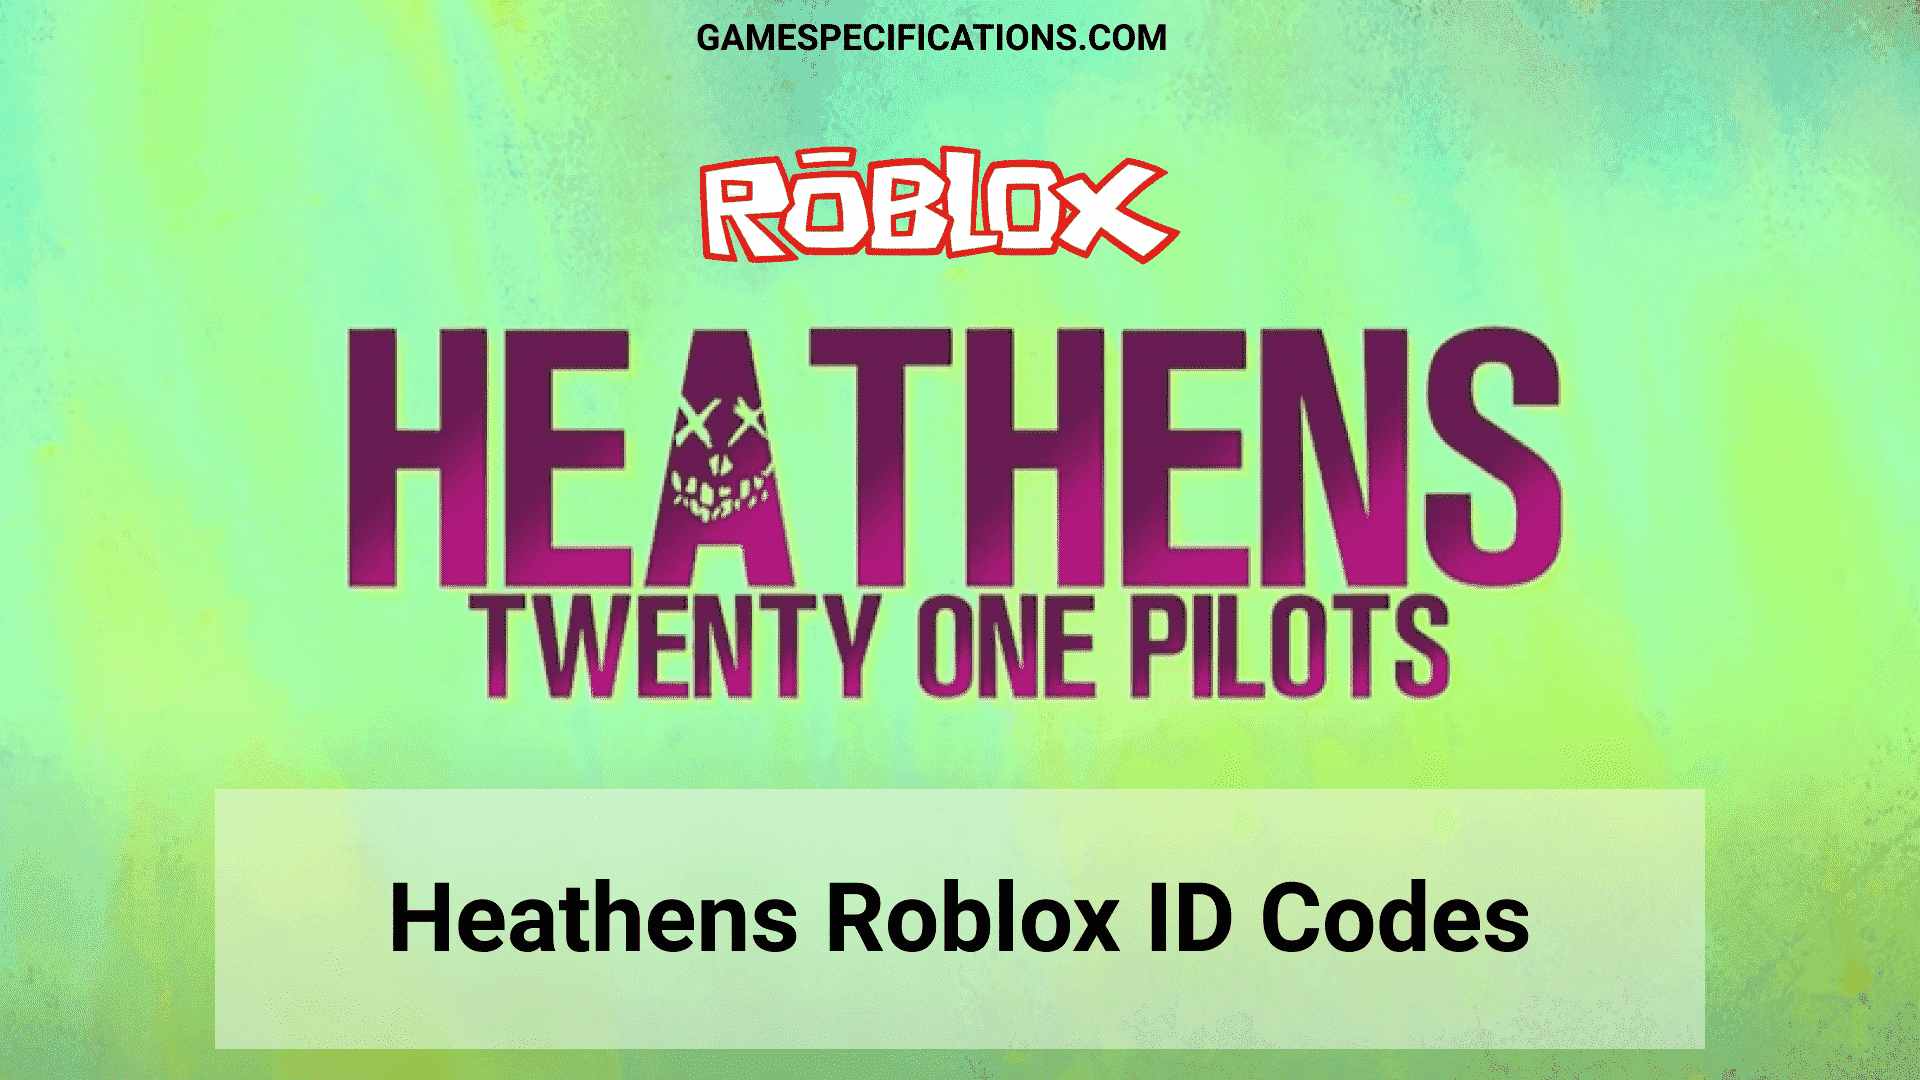 Heathens Roblox Id Codes 2021 Music Codes Game Specifications - roblox remix country song